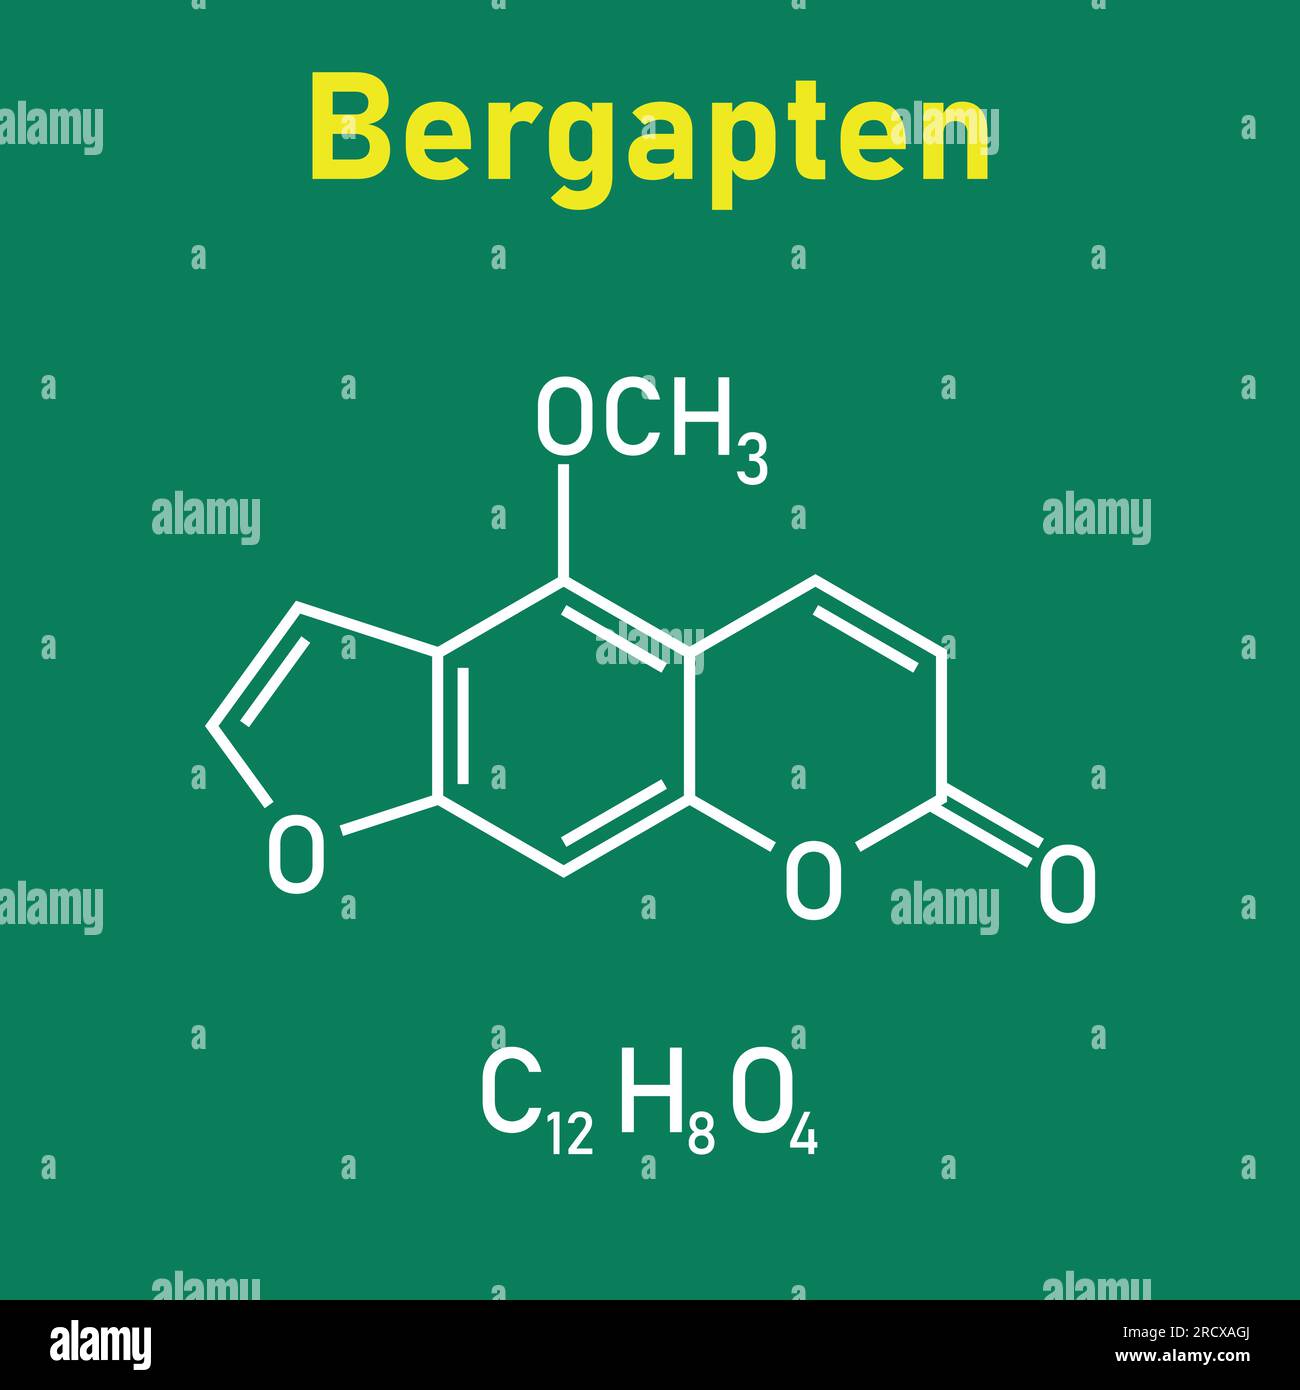 Chemical structure of Bergapten (C12H8O4). Chemical resources for teachers and students. Vector illustration isolated on white background. Stock Vector